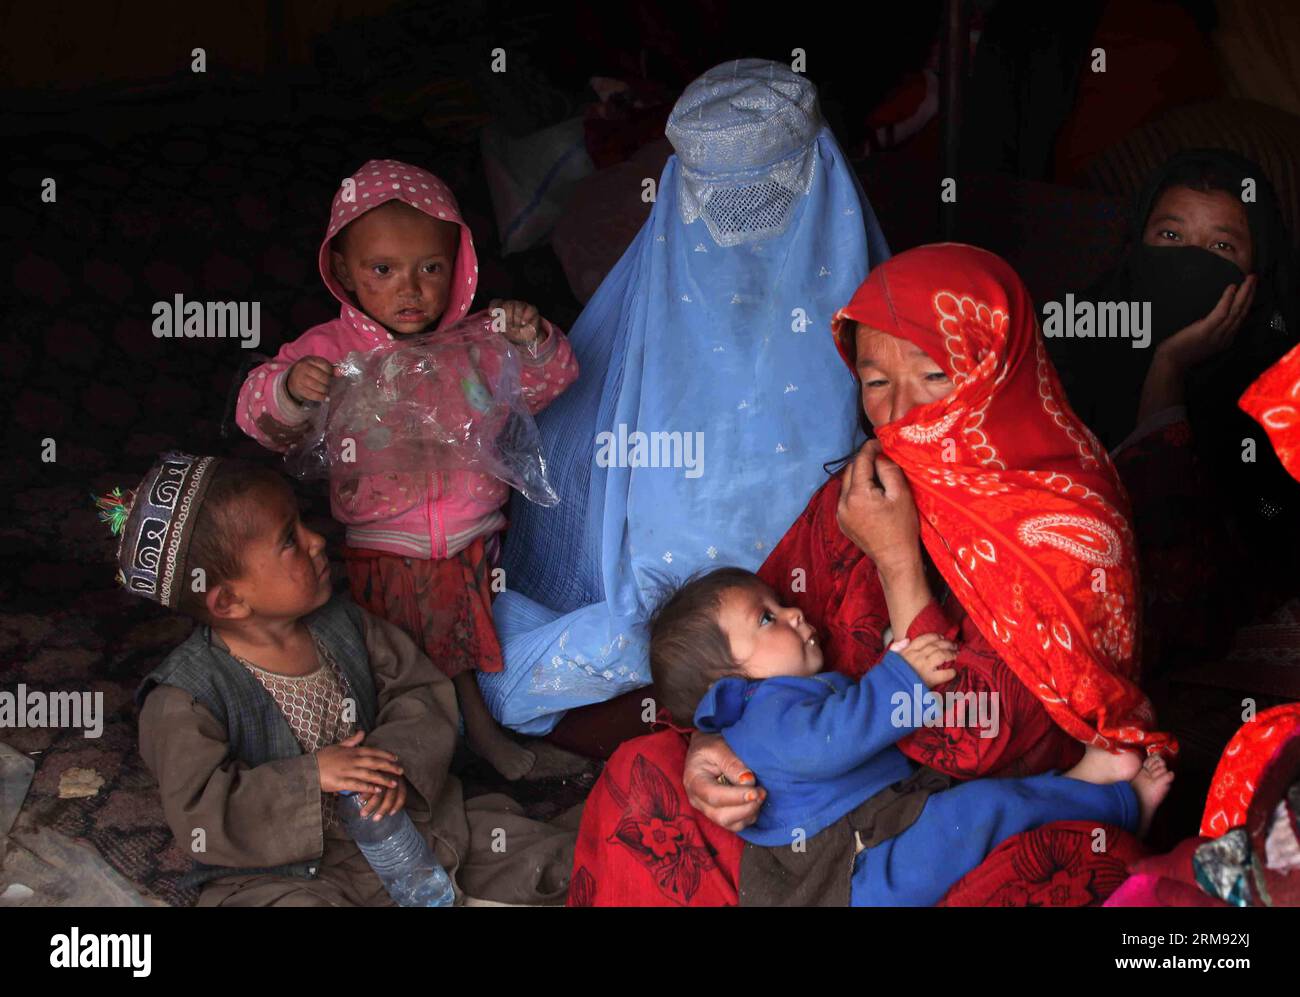 (140505) -- BADAKHSHAN, May 4, 2014 (Xinhua) -- Afghan women with their children sit under a tent waiting for relief food after a landside in Badakhshan province, northern Afghanistan, May 4, 2014. The deadly landslide occurred Friday in the mountainous province of Badakhshan. Although there is no official death toll, provincial governor Shah Waliullah Adeeb told Xinhua that more than 2,500 people might have lost their lives. (Xinhua/Ahmad Massoud) AFGHANISTAN-BADAKHSHAN-LANDSLIDE PUBLICATIONxNOTxINxCHN   Badakhshan May 4 2014 XINHUA Afghan Women With their Children Sit Under a Tent Waiting fo Stock Photo